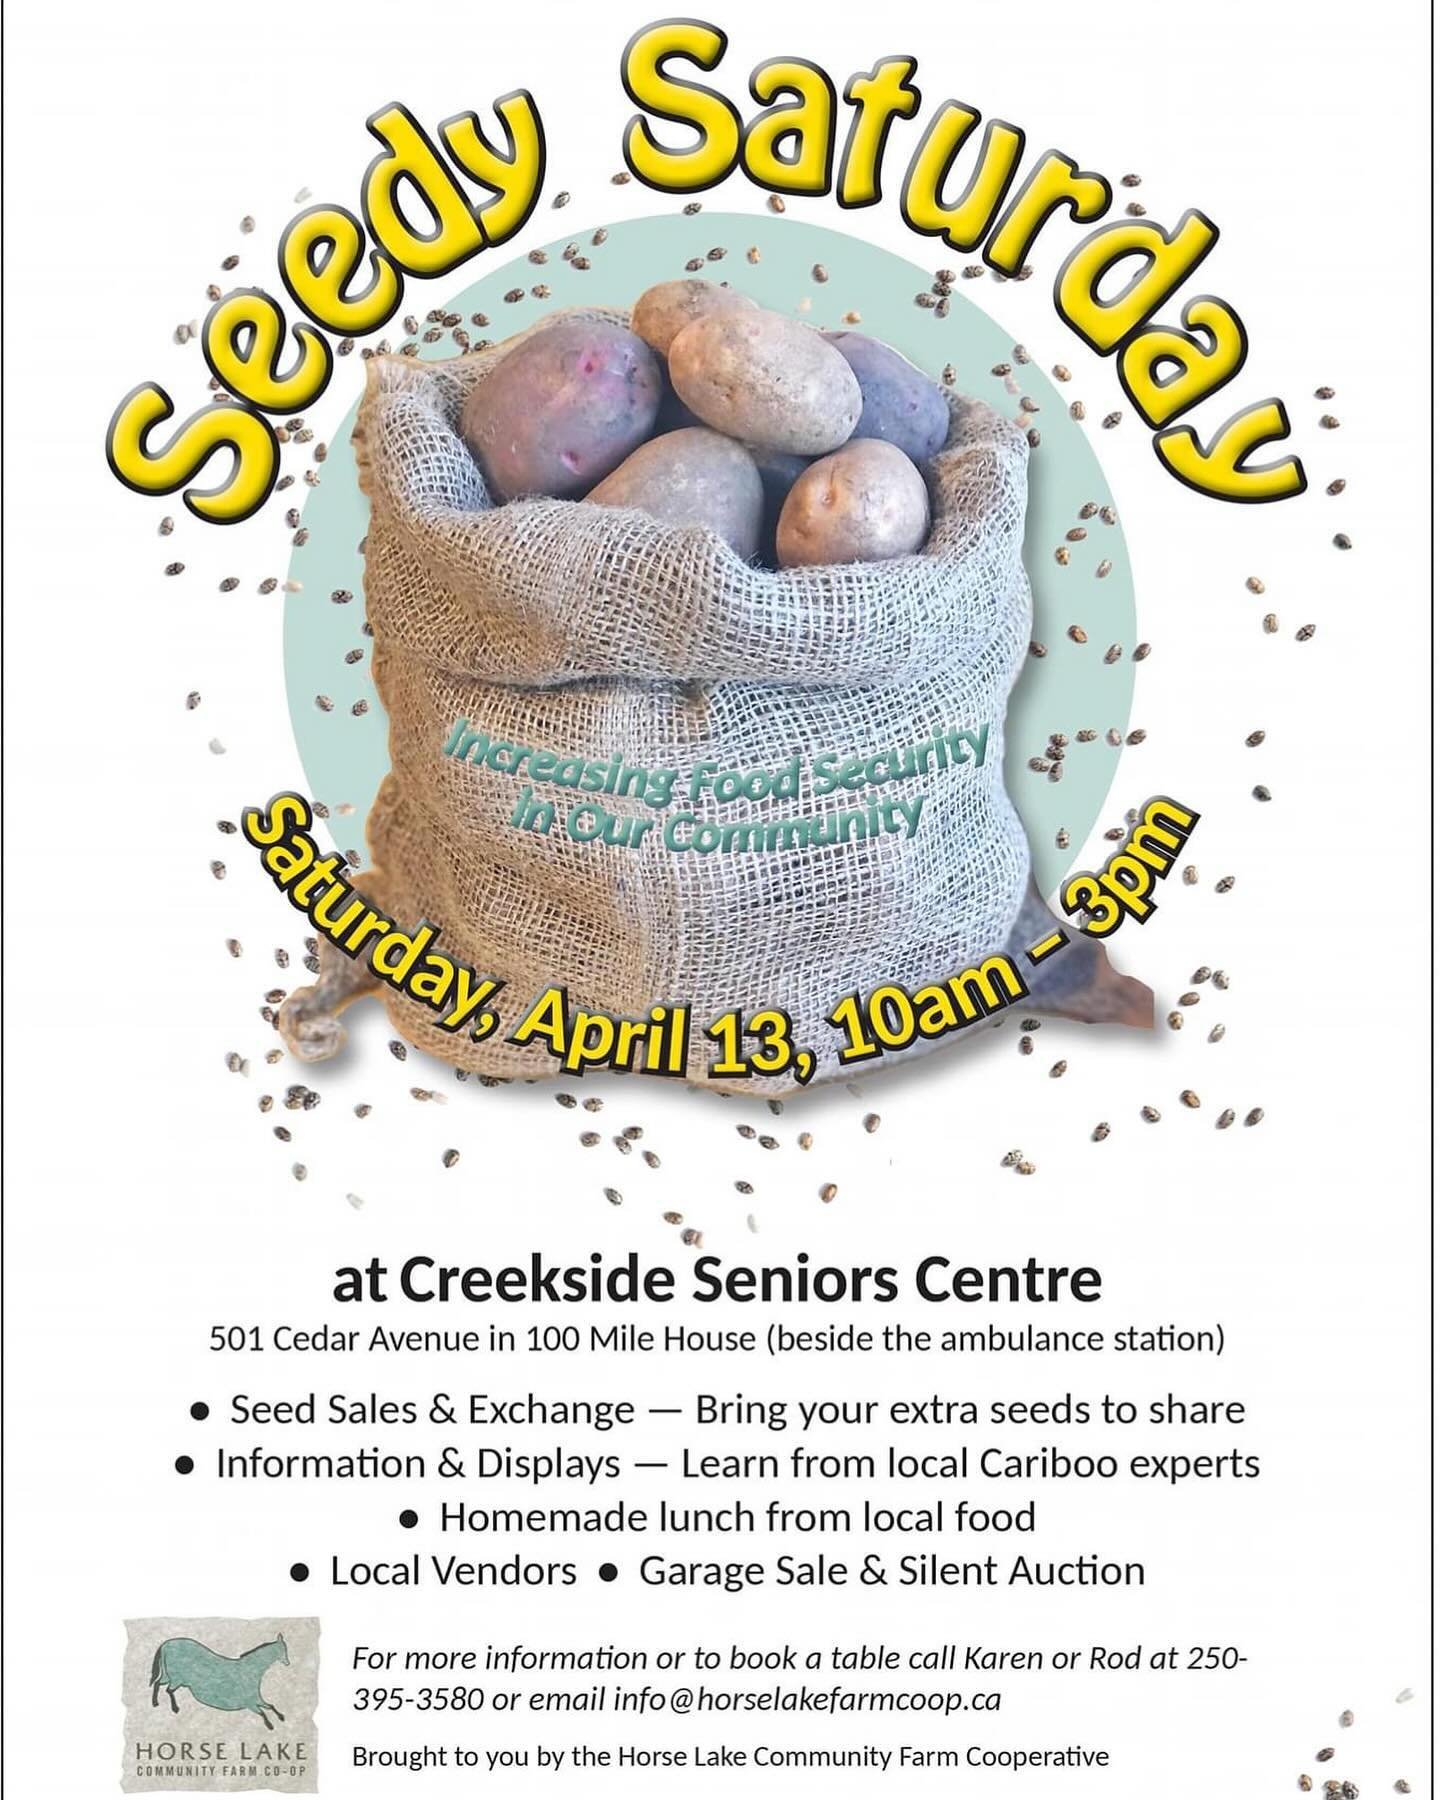 Don&rsquo;t forget that this Saturday is 100 Mile House&rsquo;s Seedy Saturday! 10-3 at the Creekside Senior&rsquo;s Centre! 
.
.
.
.
.
.
#beautifulbc #southcariboofarmersmarket #discoversouthcariboo #explorebc #freshproduce #secwepemculecw #farmfres